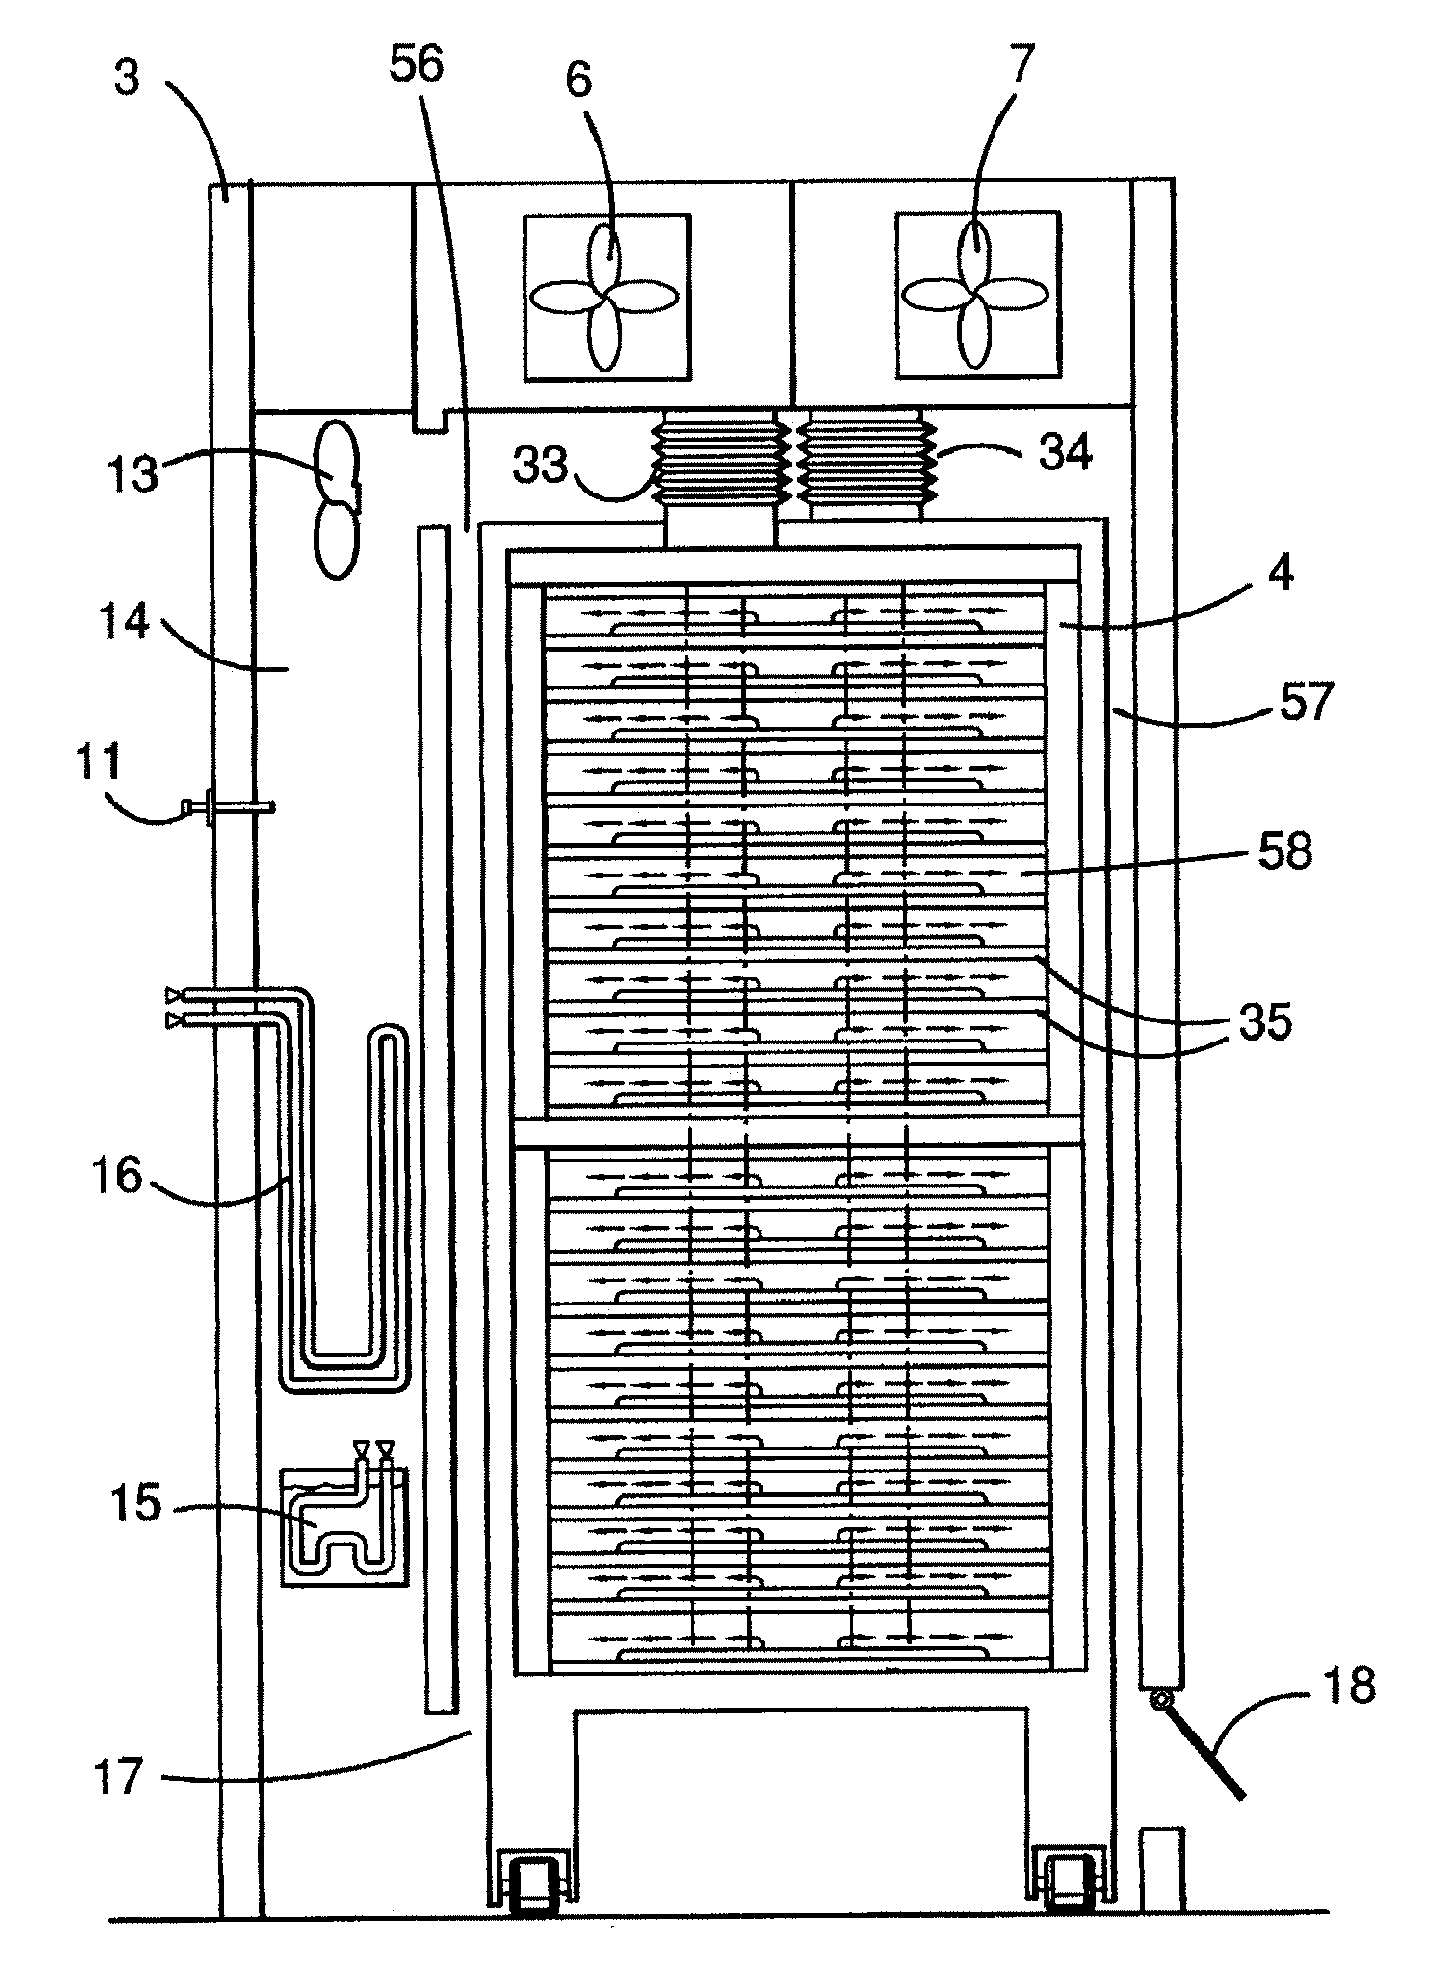 Dough conditioning apparatus and method